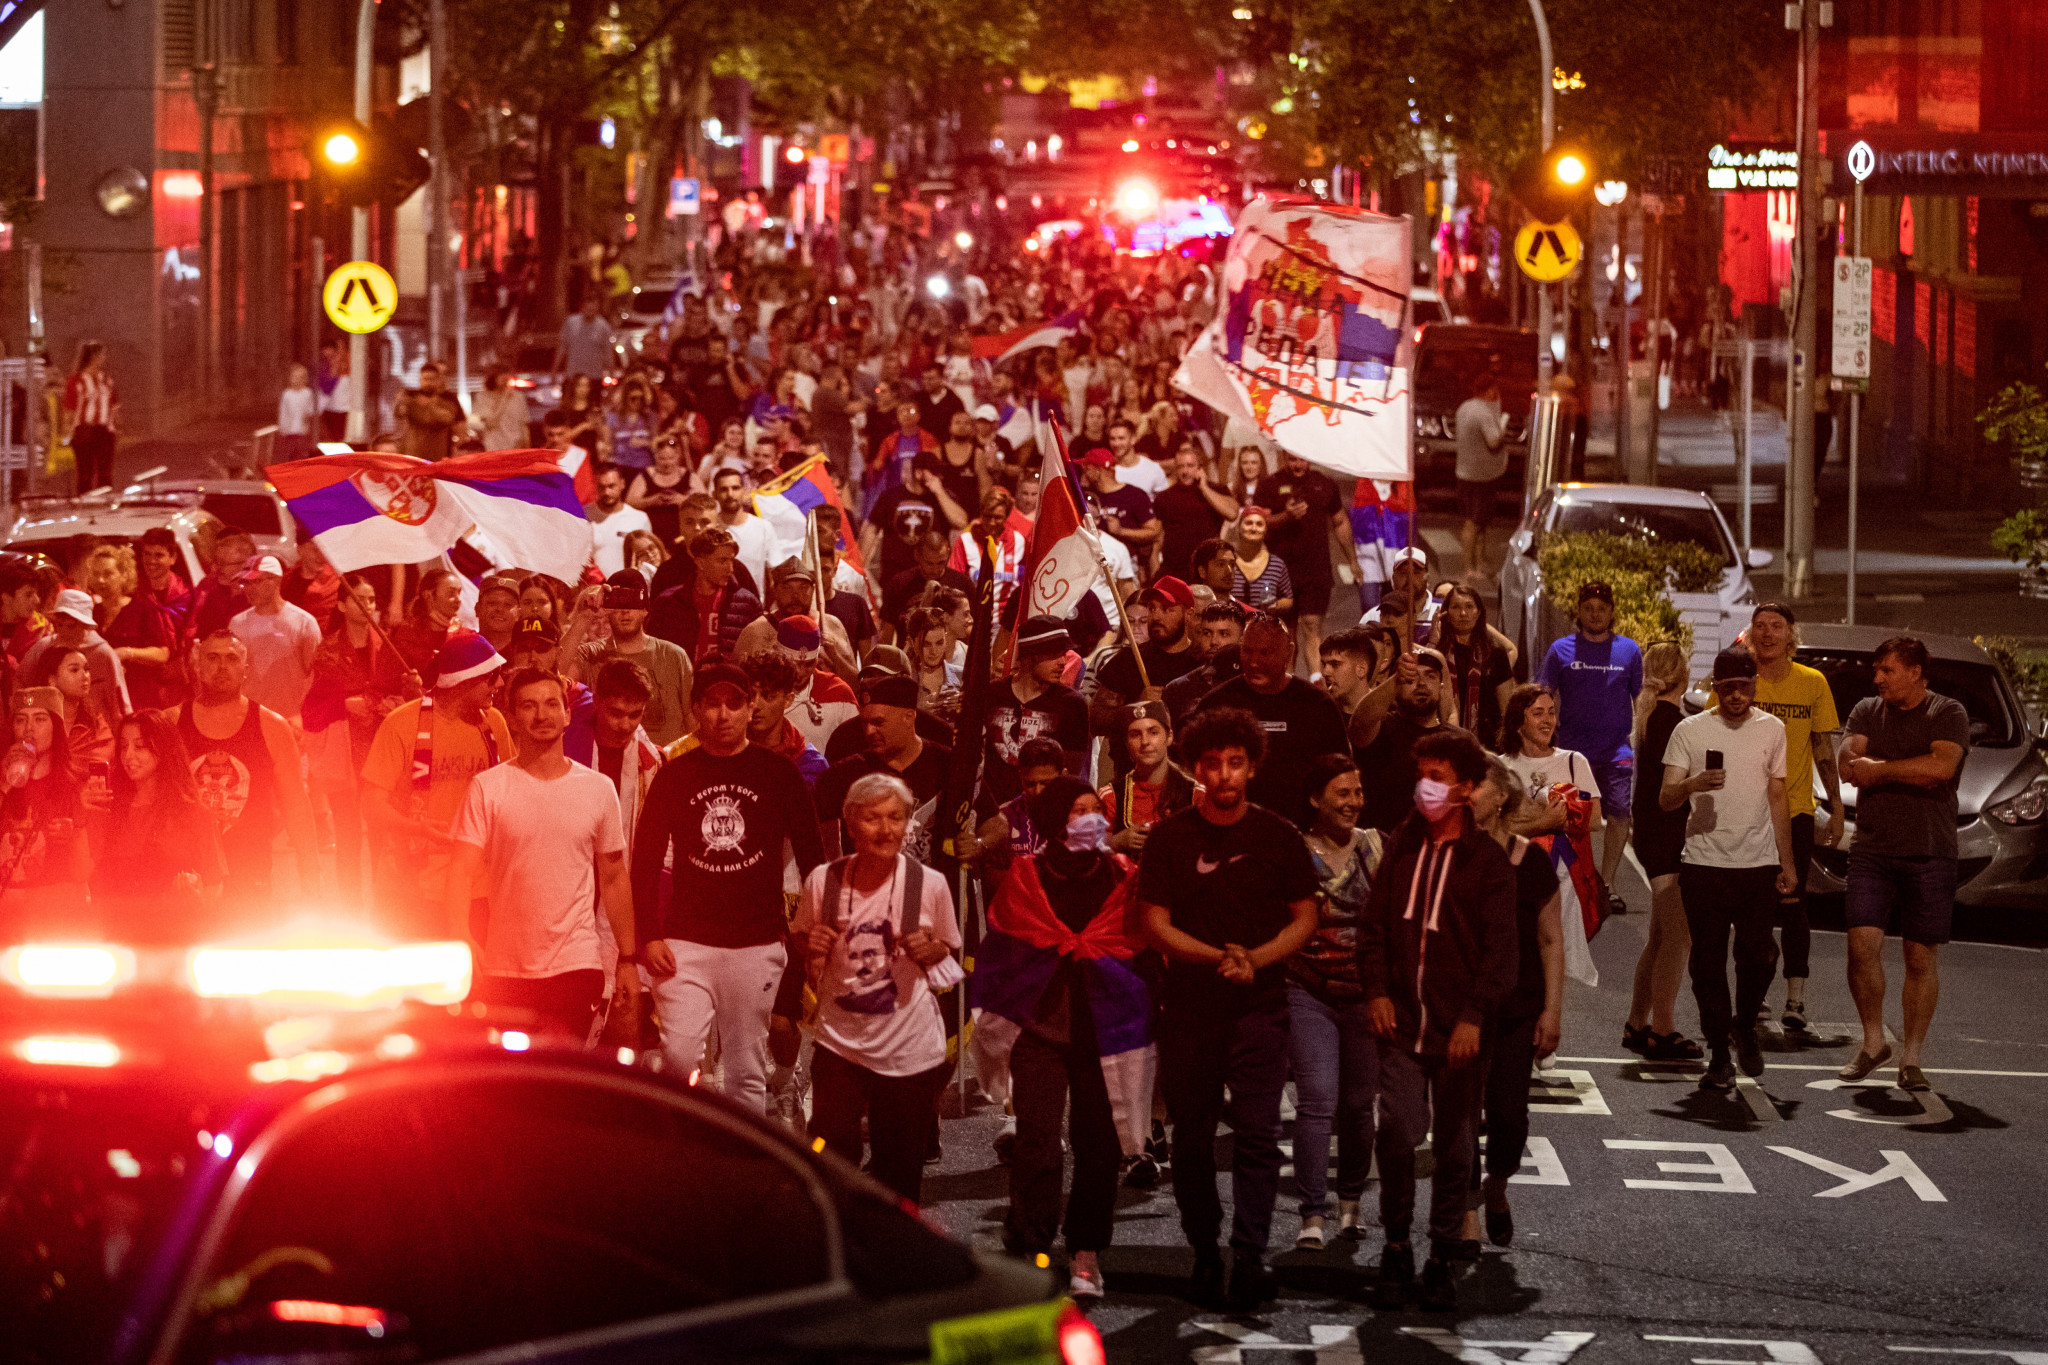 Serbian tennis fans march the streets in Melbourne to celebrate Djokovic's release from detention ©Getty Images